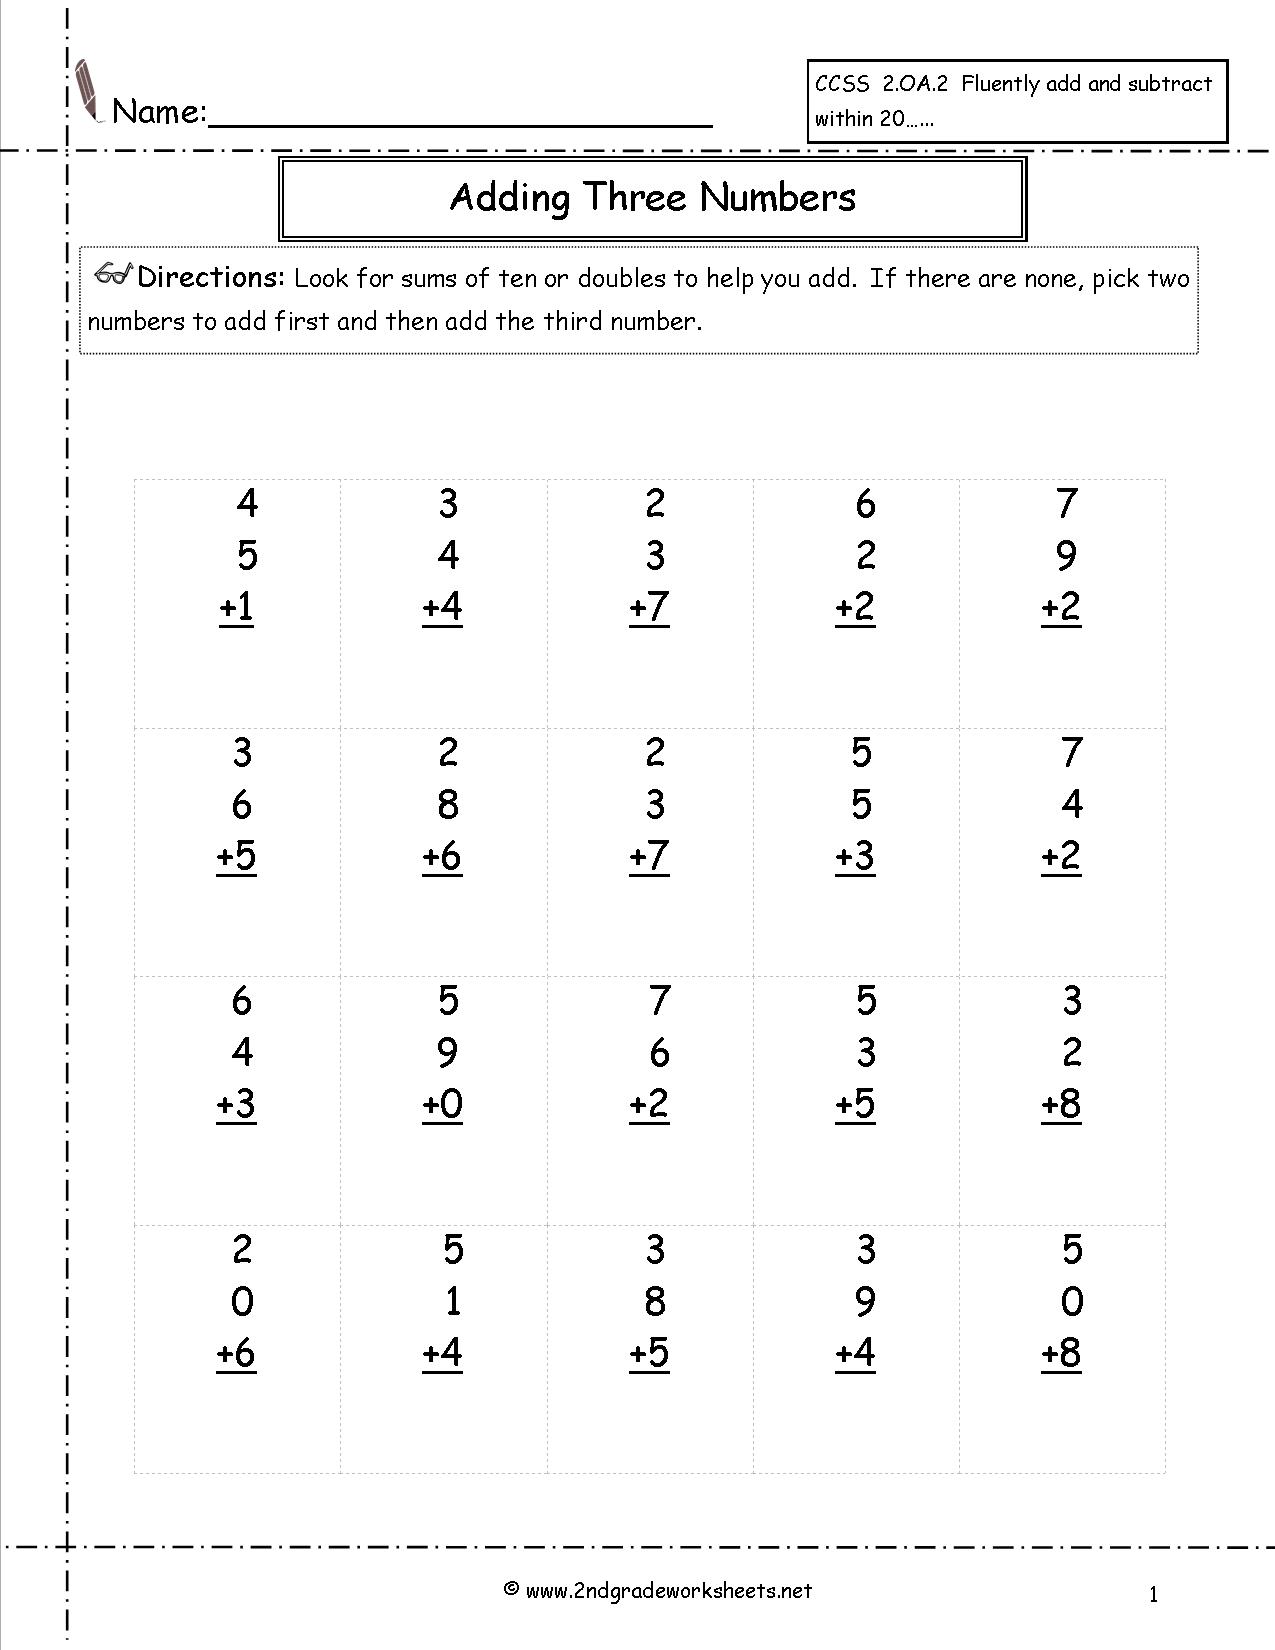 7 Best Images of Adding 3 Numbers Worksheets Printable ...